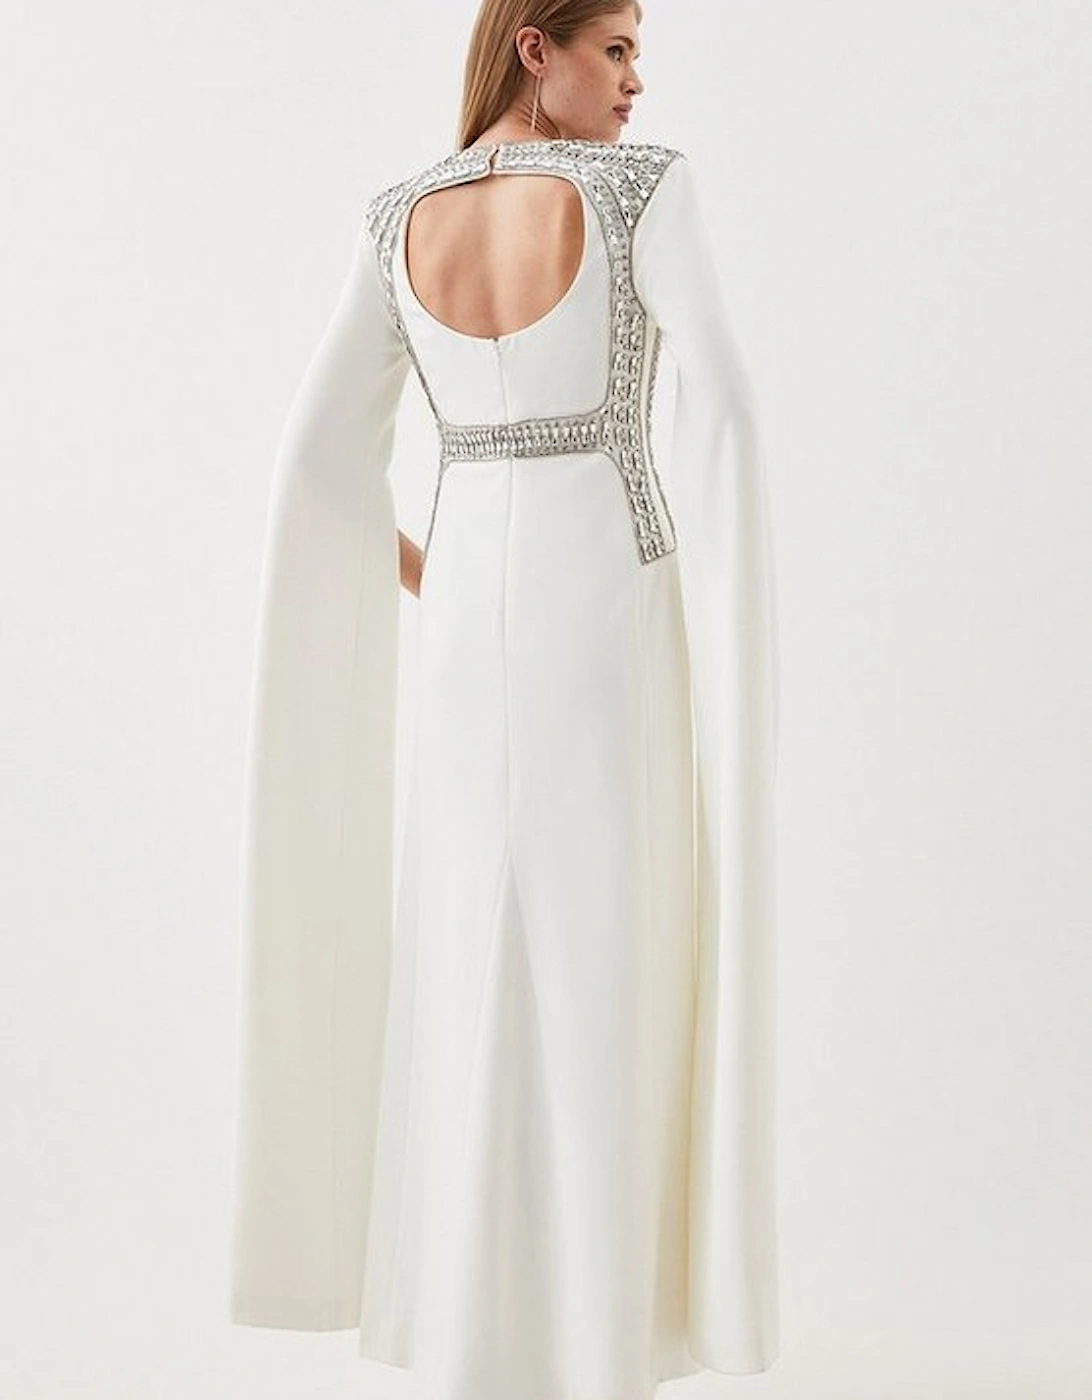 Petite Embellished Caddy Cape Sleeve Woven Maxi Dress